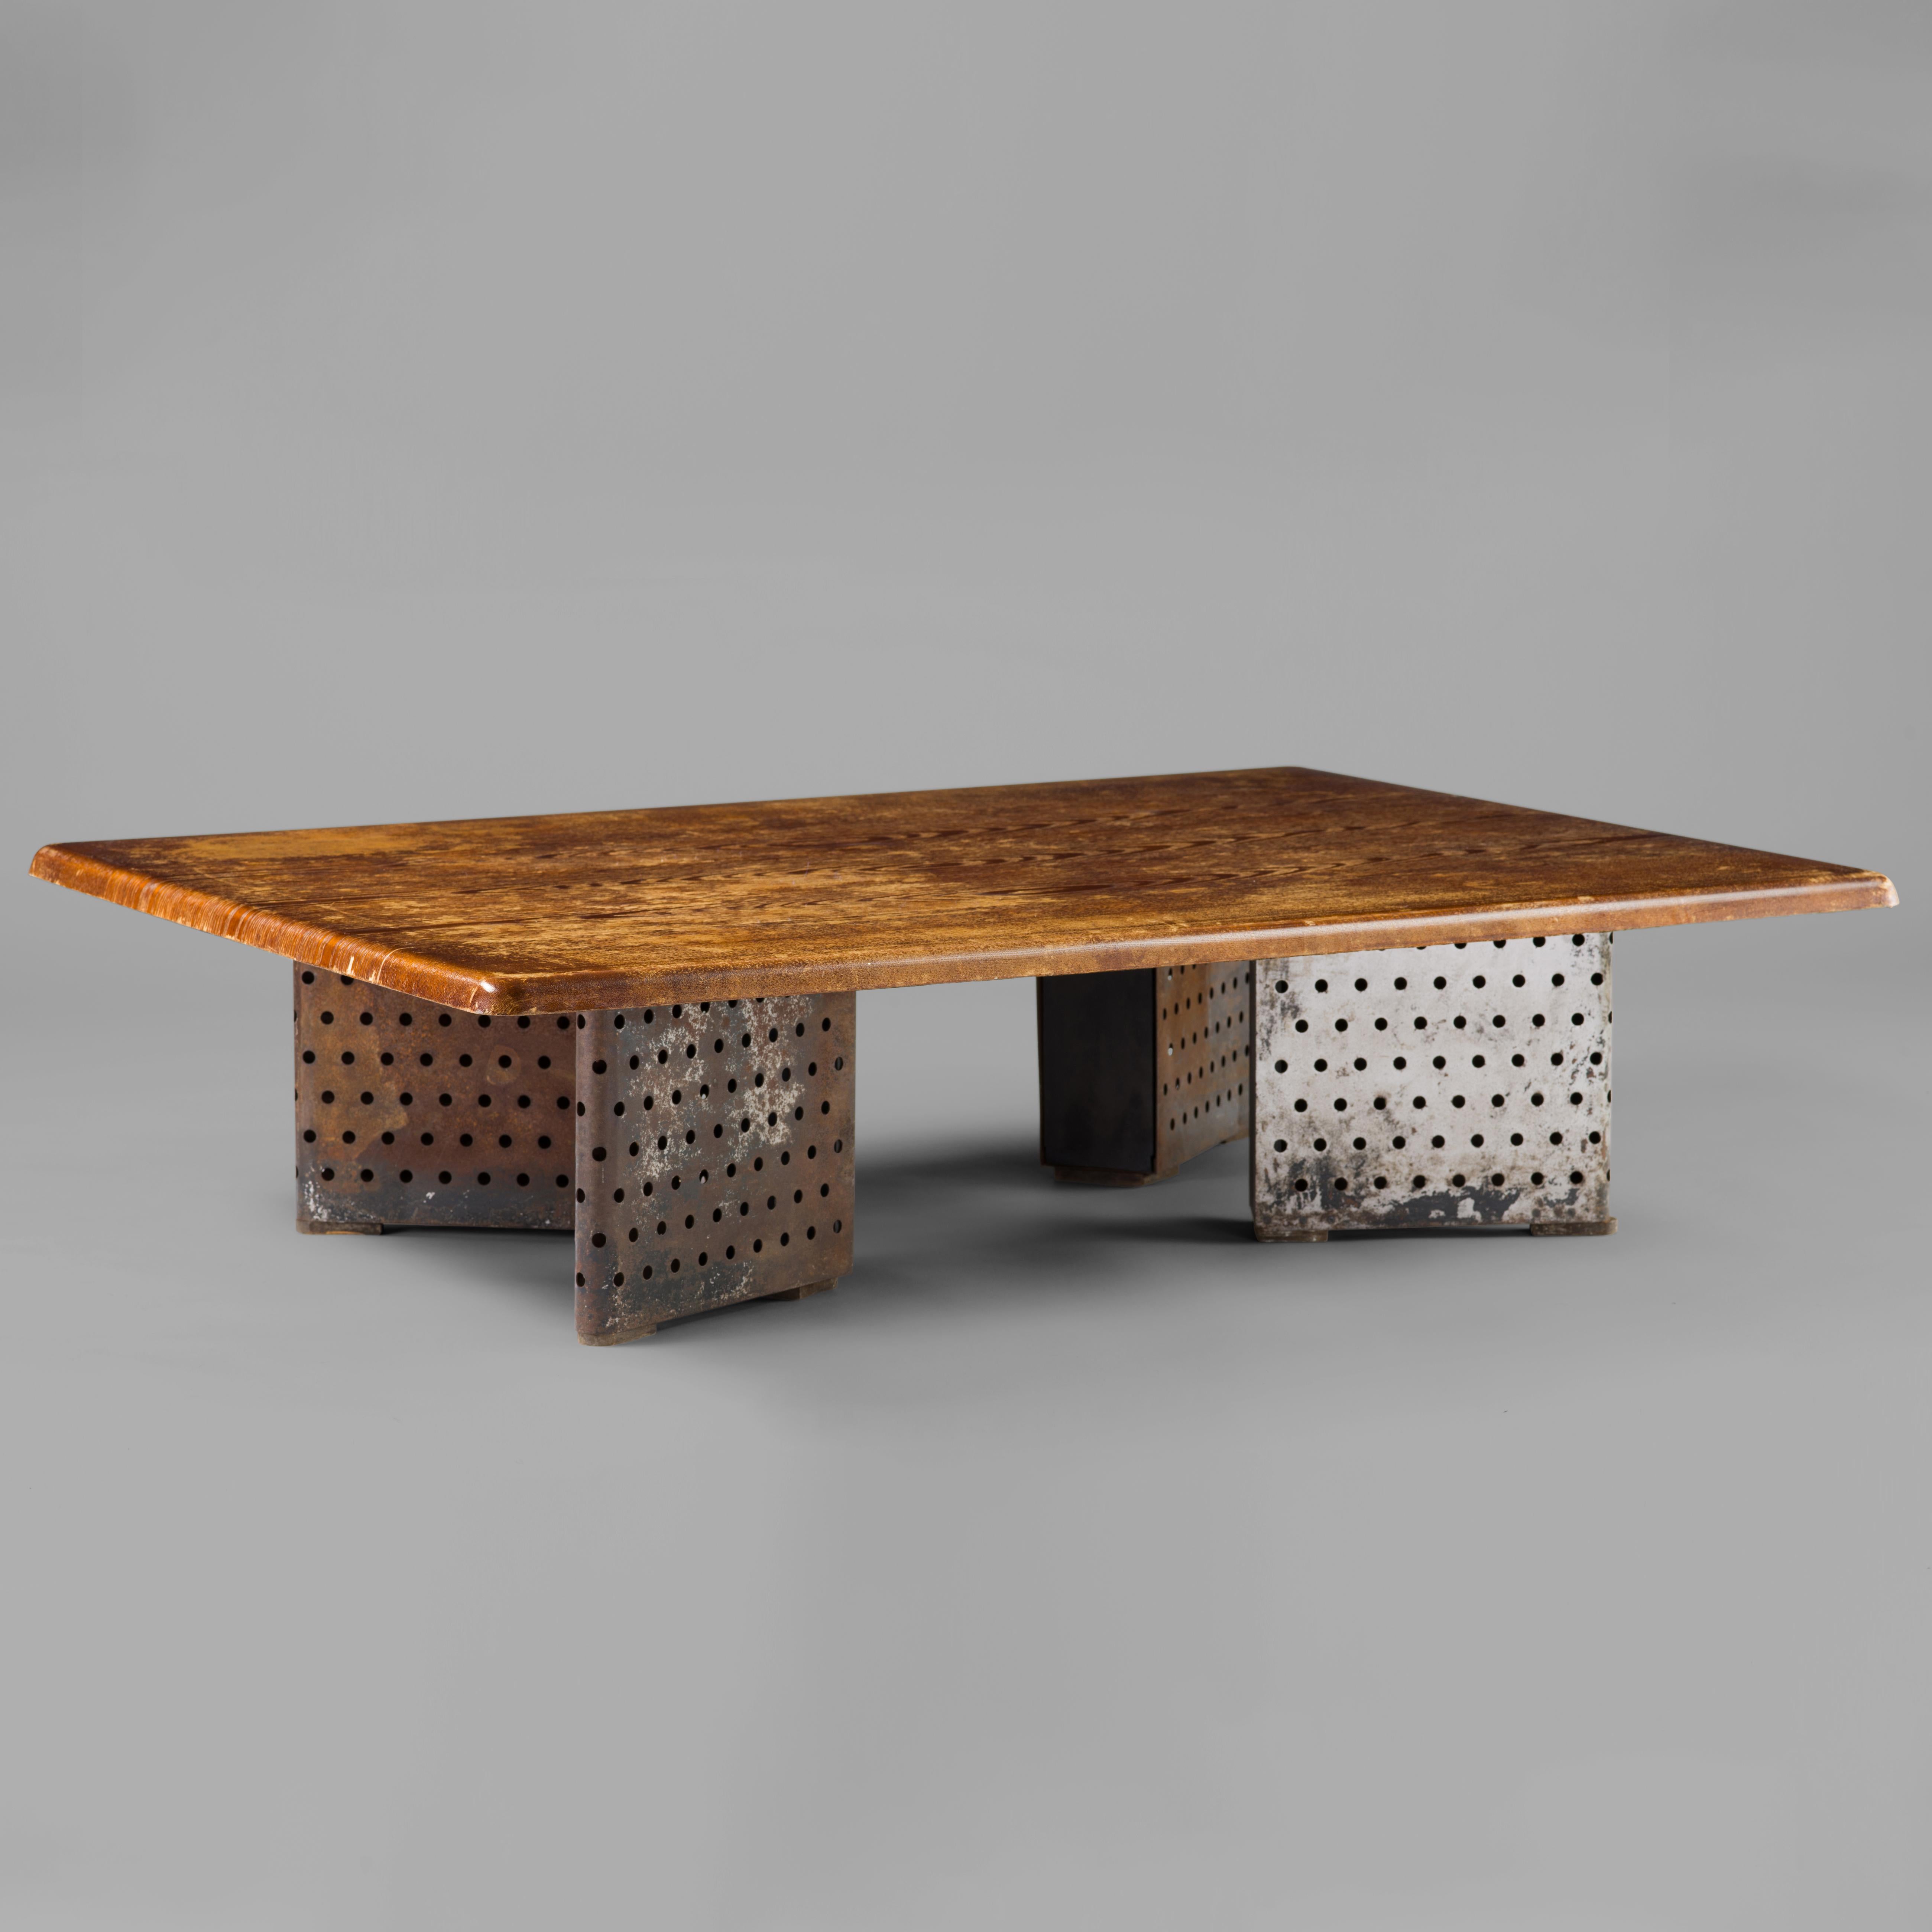 A low table comprising an oak-veneered wood top with bullnose edge supported by canted, wedge-shaped legs made from perforated steel sheet and stained wood, designed and manufactured by Marcel Yvroud for Cité Universitaire, Antony. There's scant